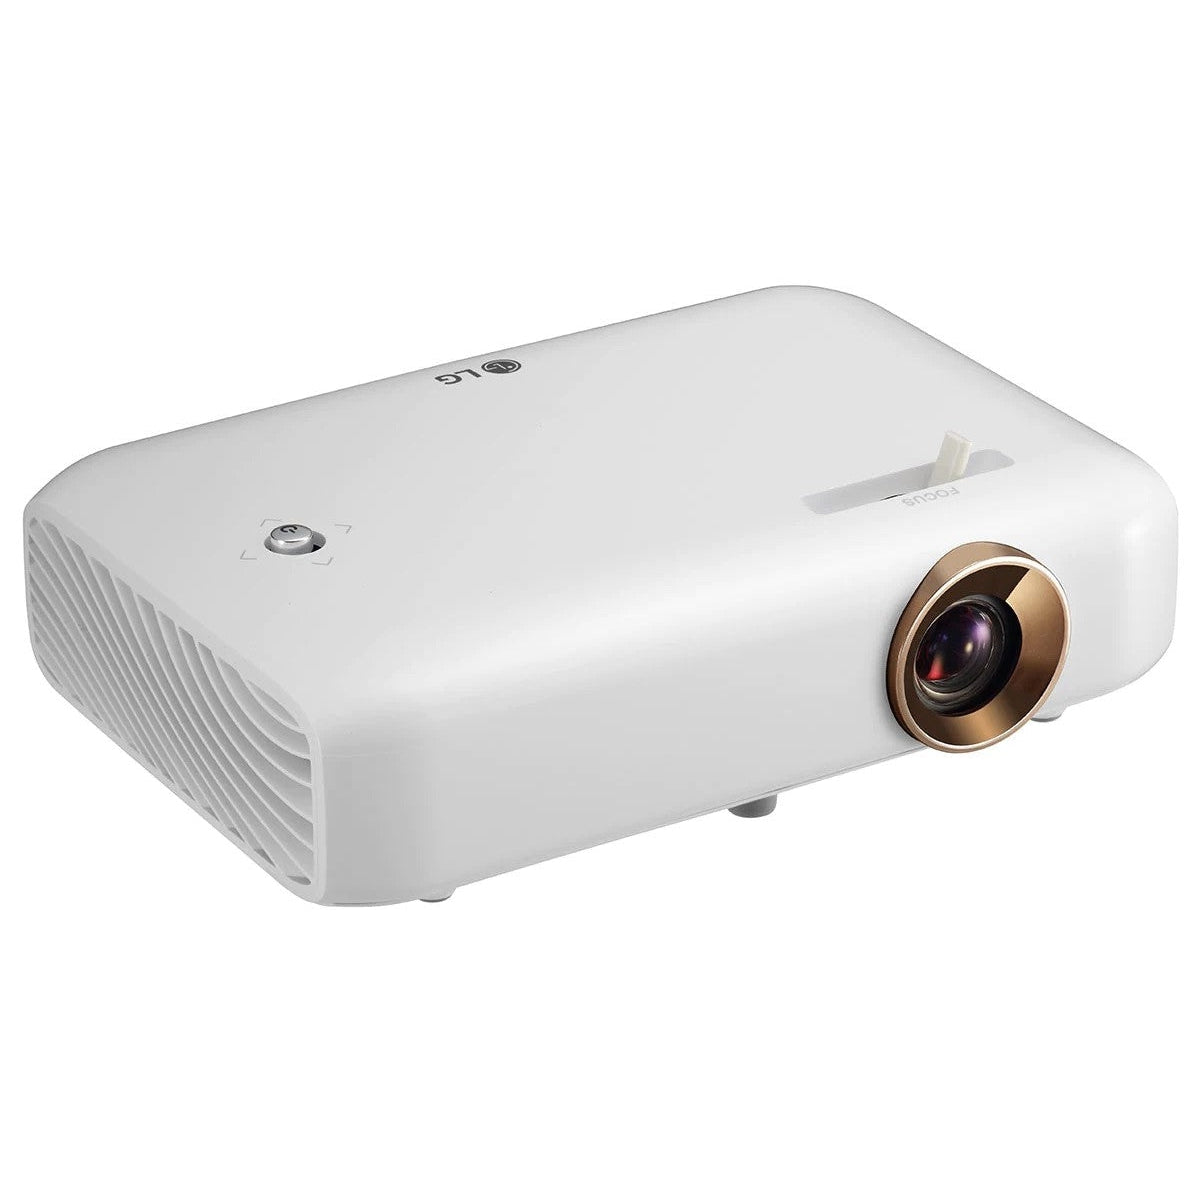 LG PH510PG 550 lumens LED projector built-in battery 2.5Hrs